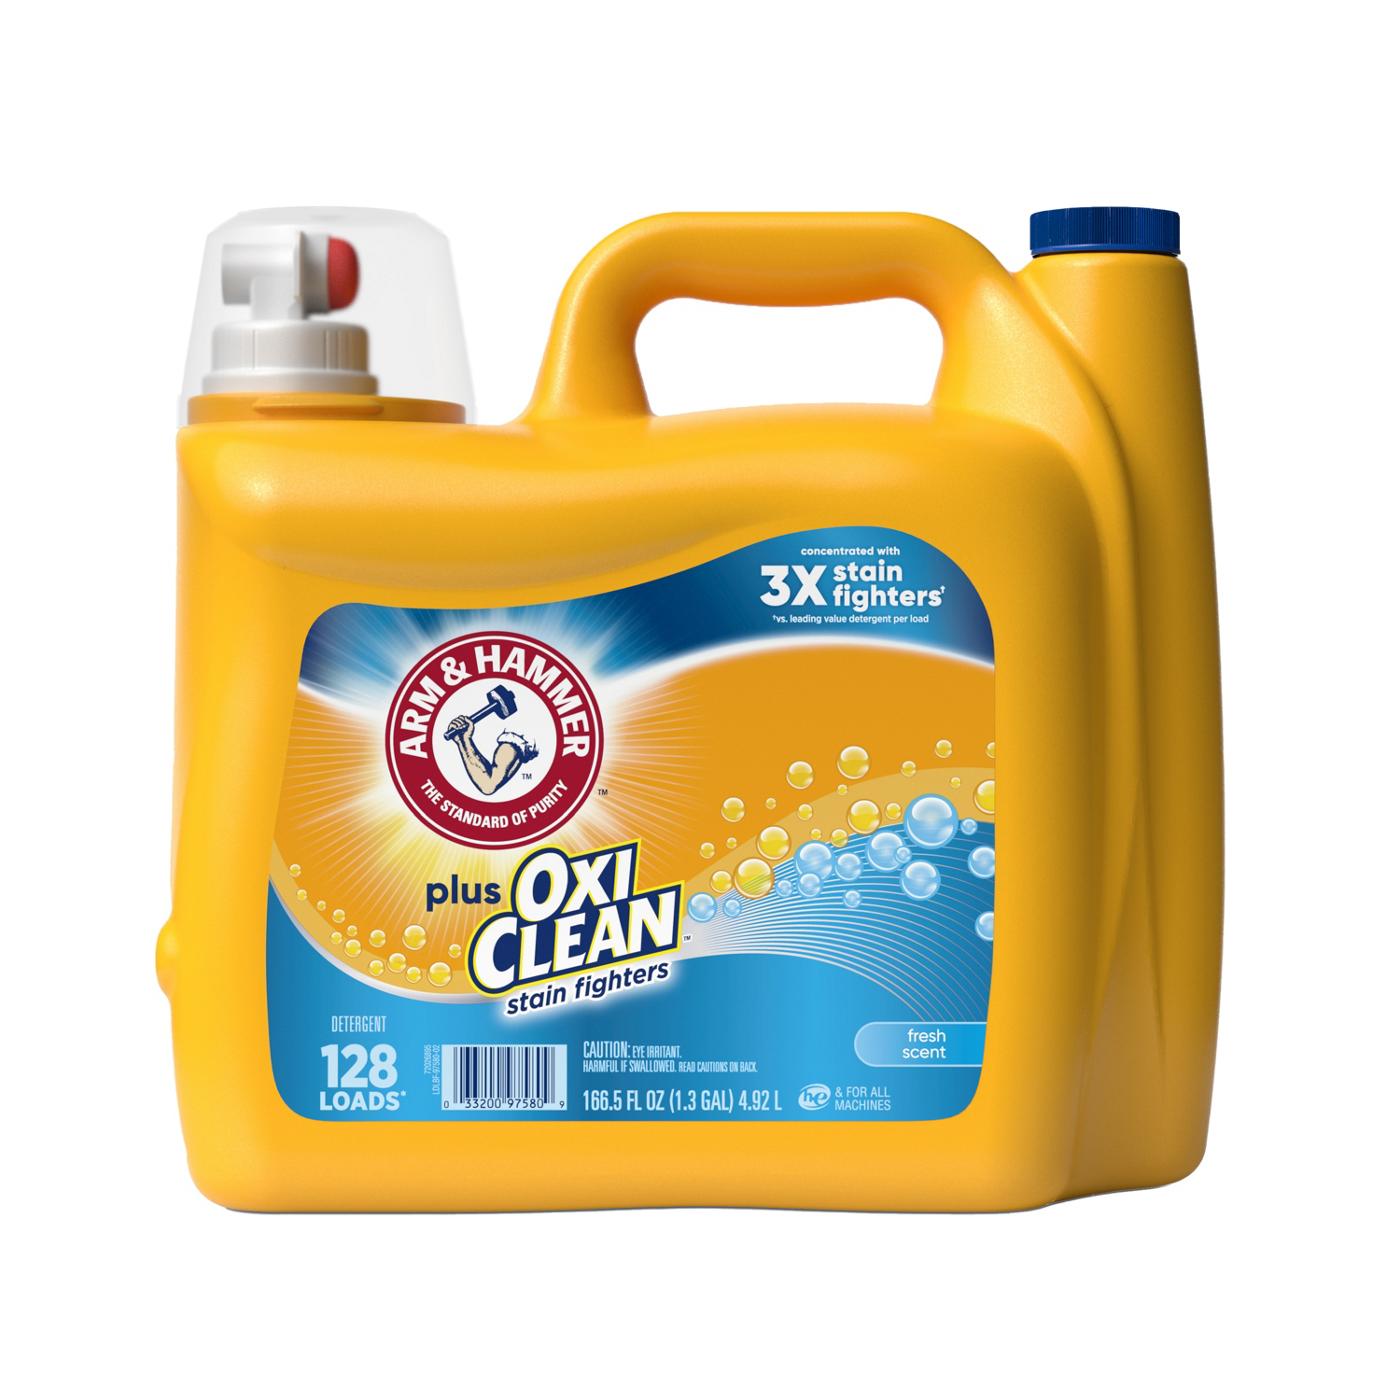 Arm & Hammer Plus OxiClean HE Liquid Laundry Detergent, 128 Loads - Fresh Scent; image 1 of 4